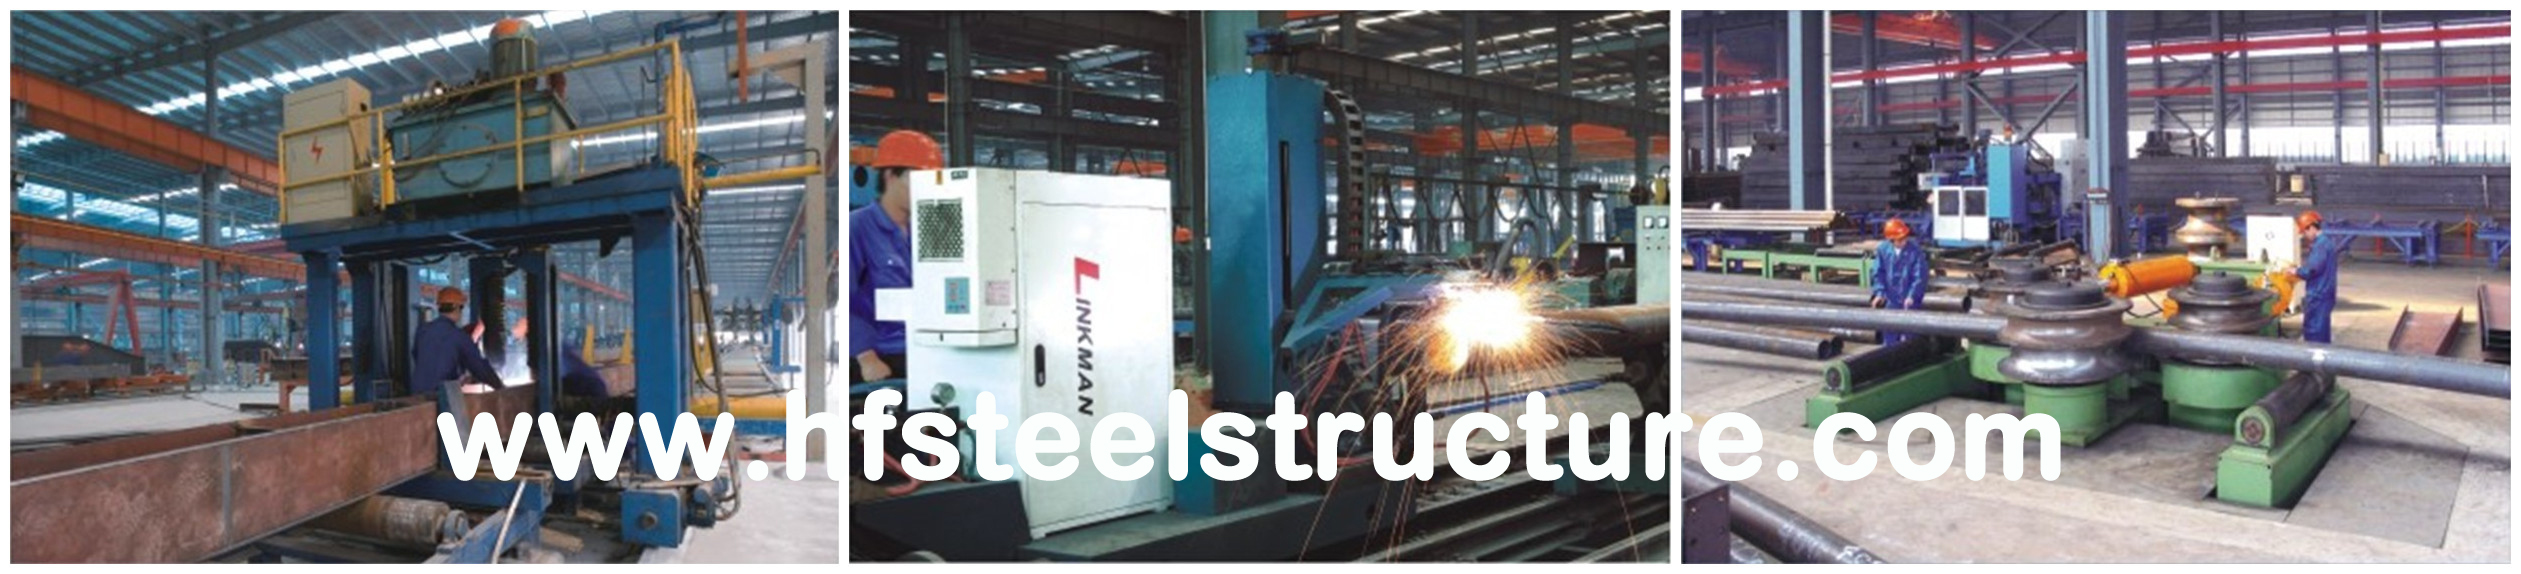 OEM Sawing, Grinding Industrial Steel Buildings For Textile Factories And Process Plants